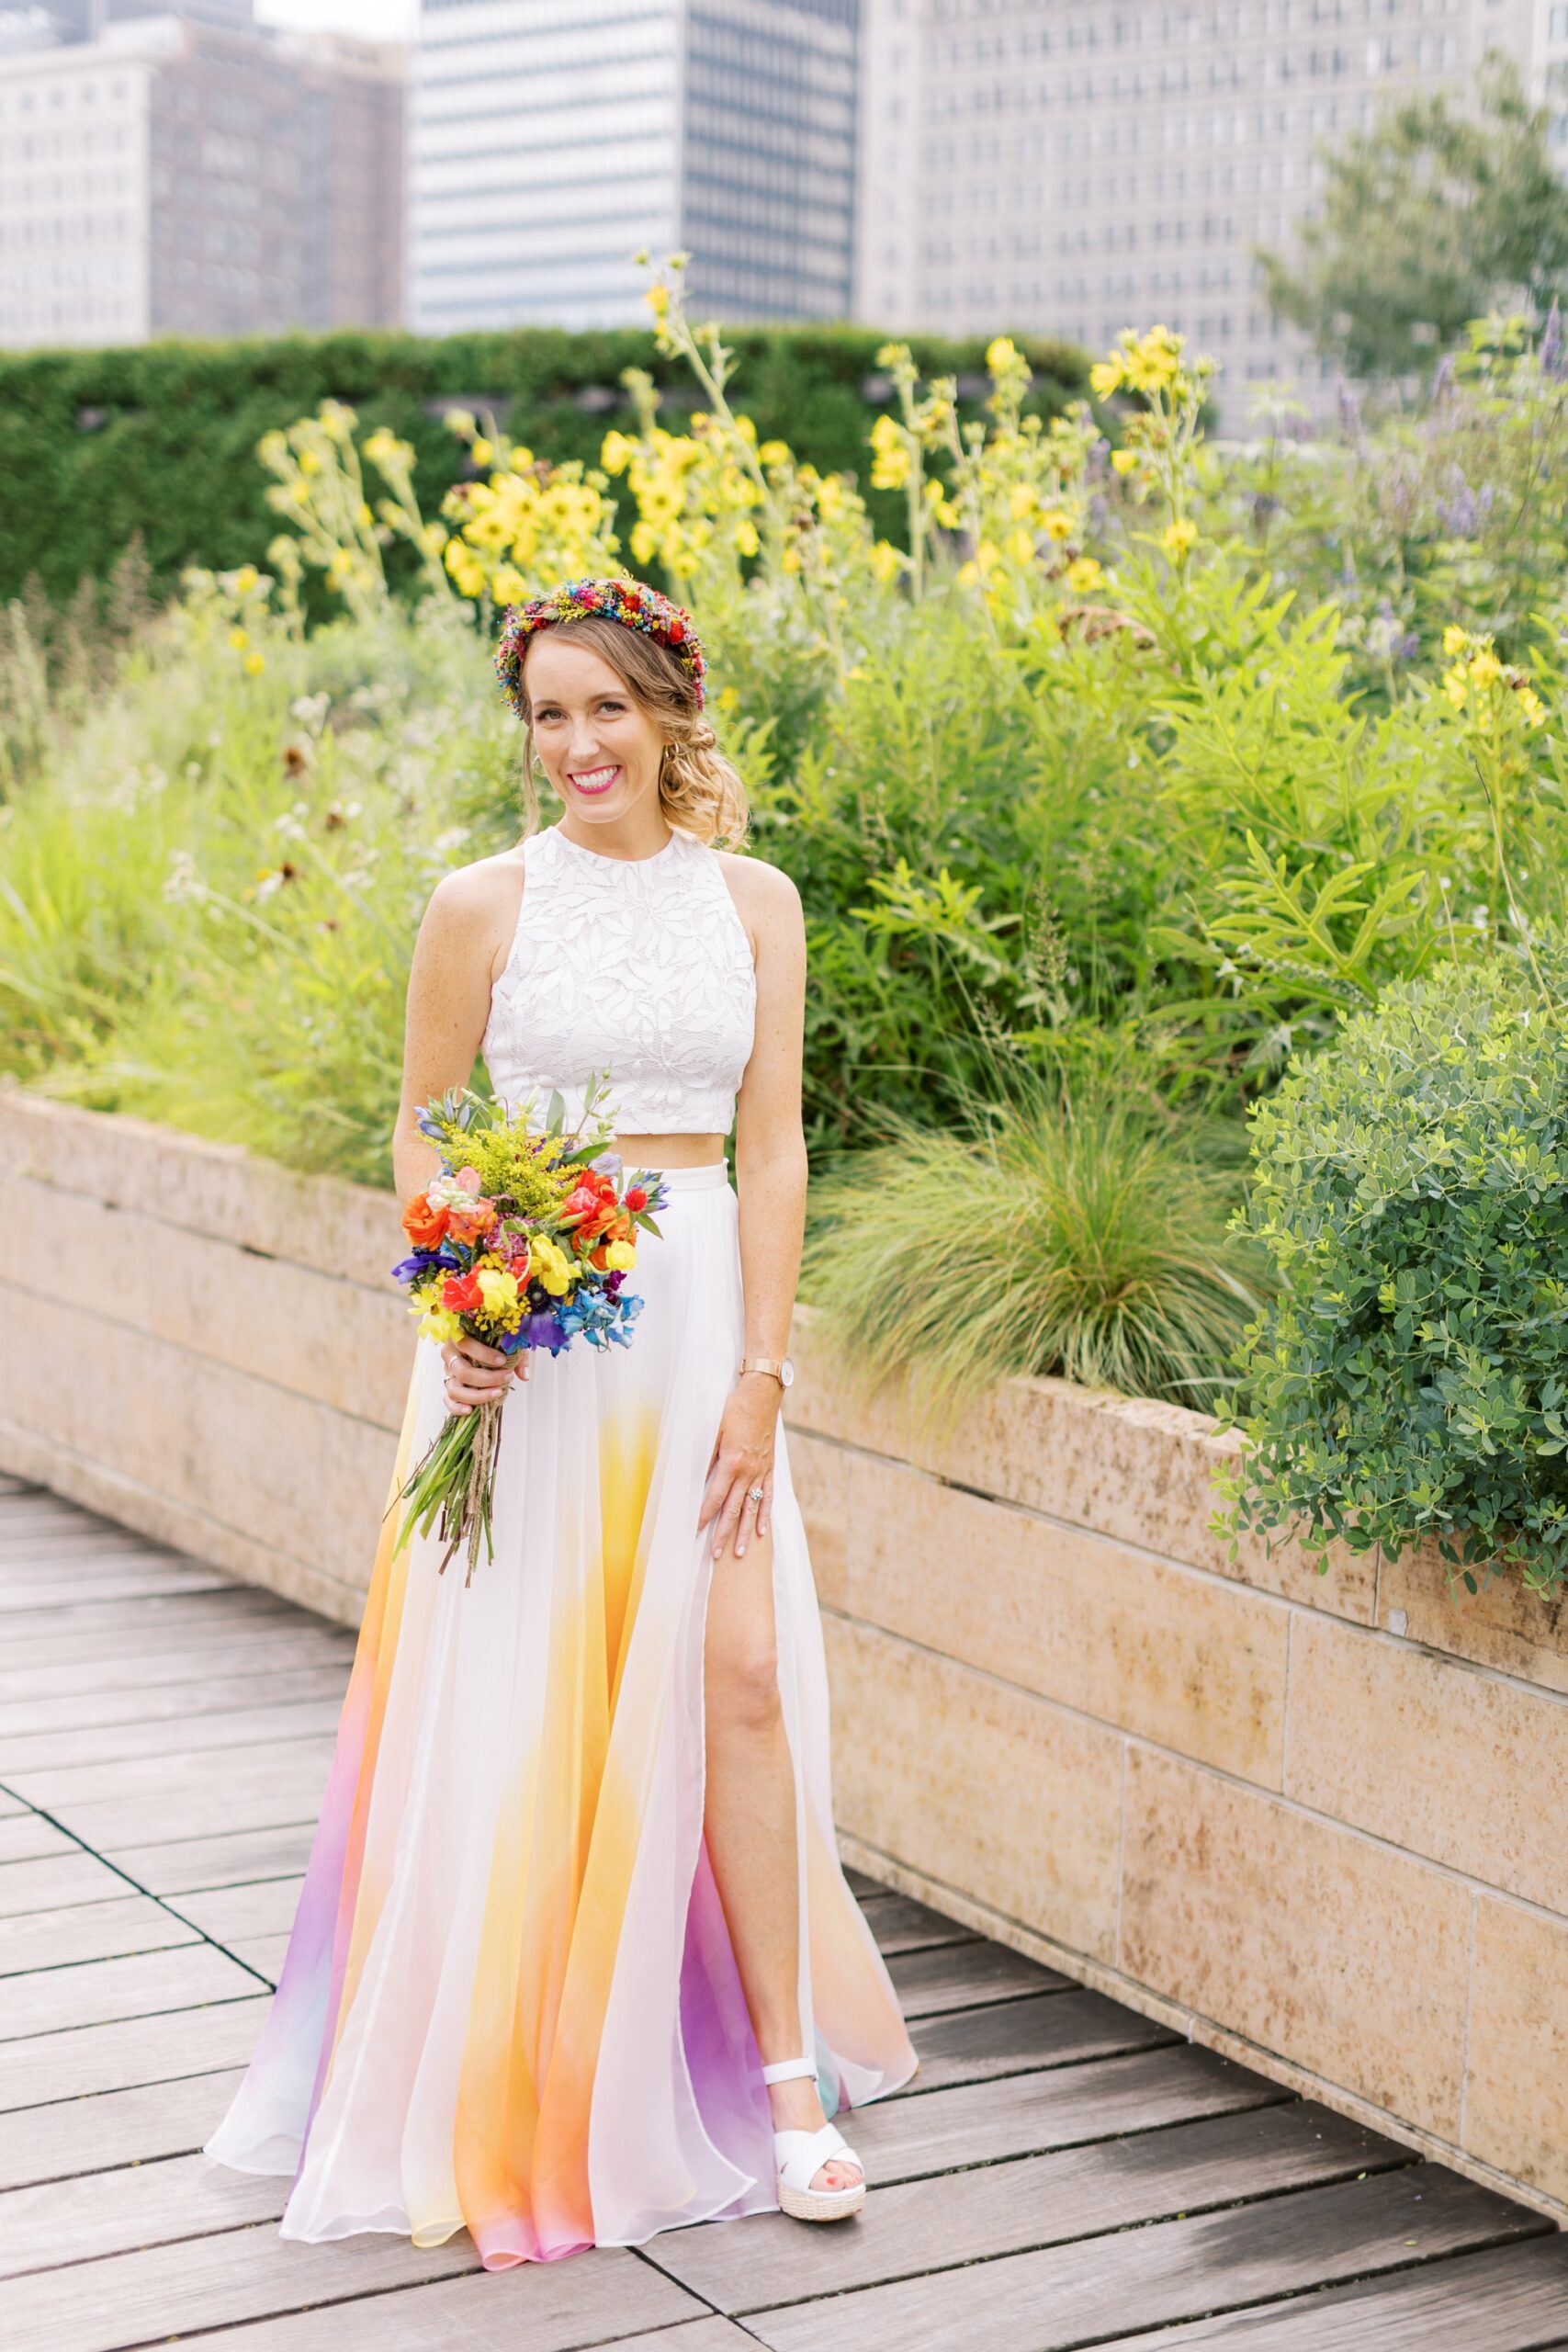 The bride wore a colorful wedding skirt that fit the colorful wedding palette